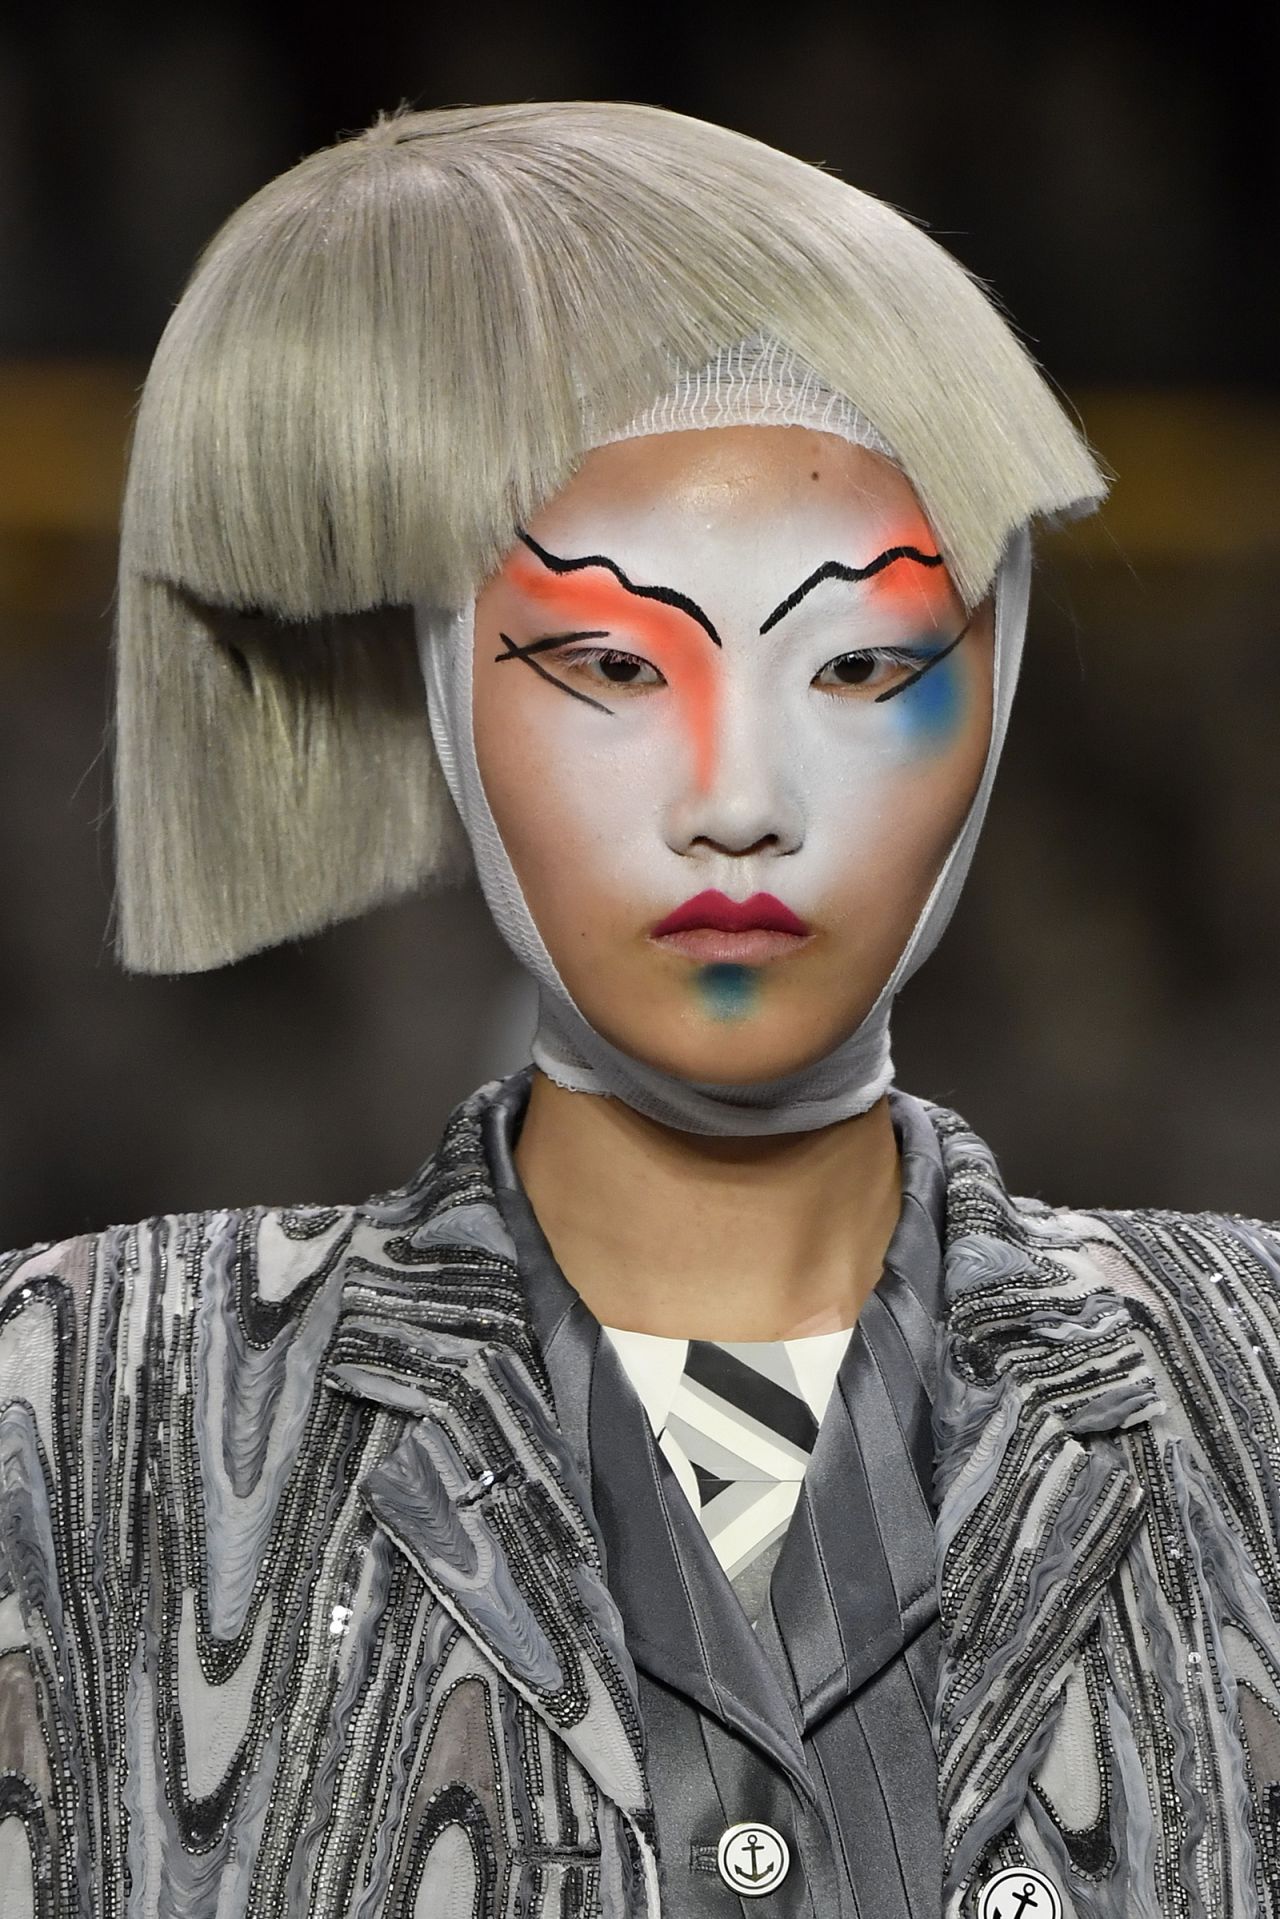 The makeup at Thom Browne was inspired by the New Romantics.